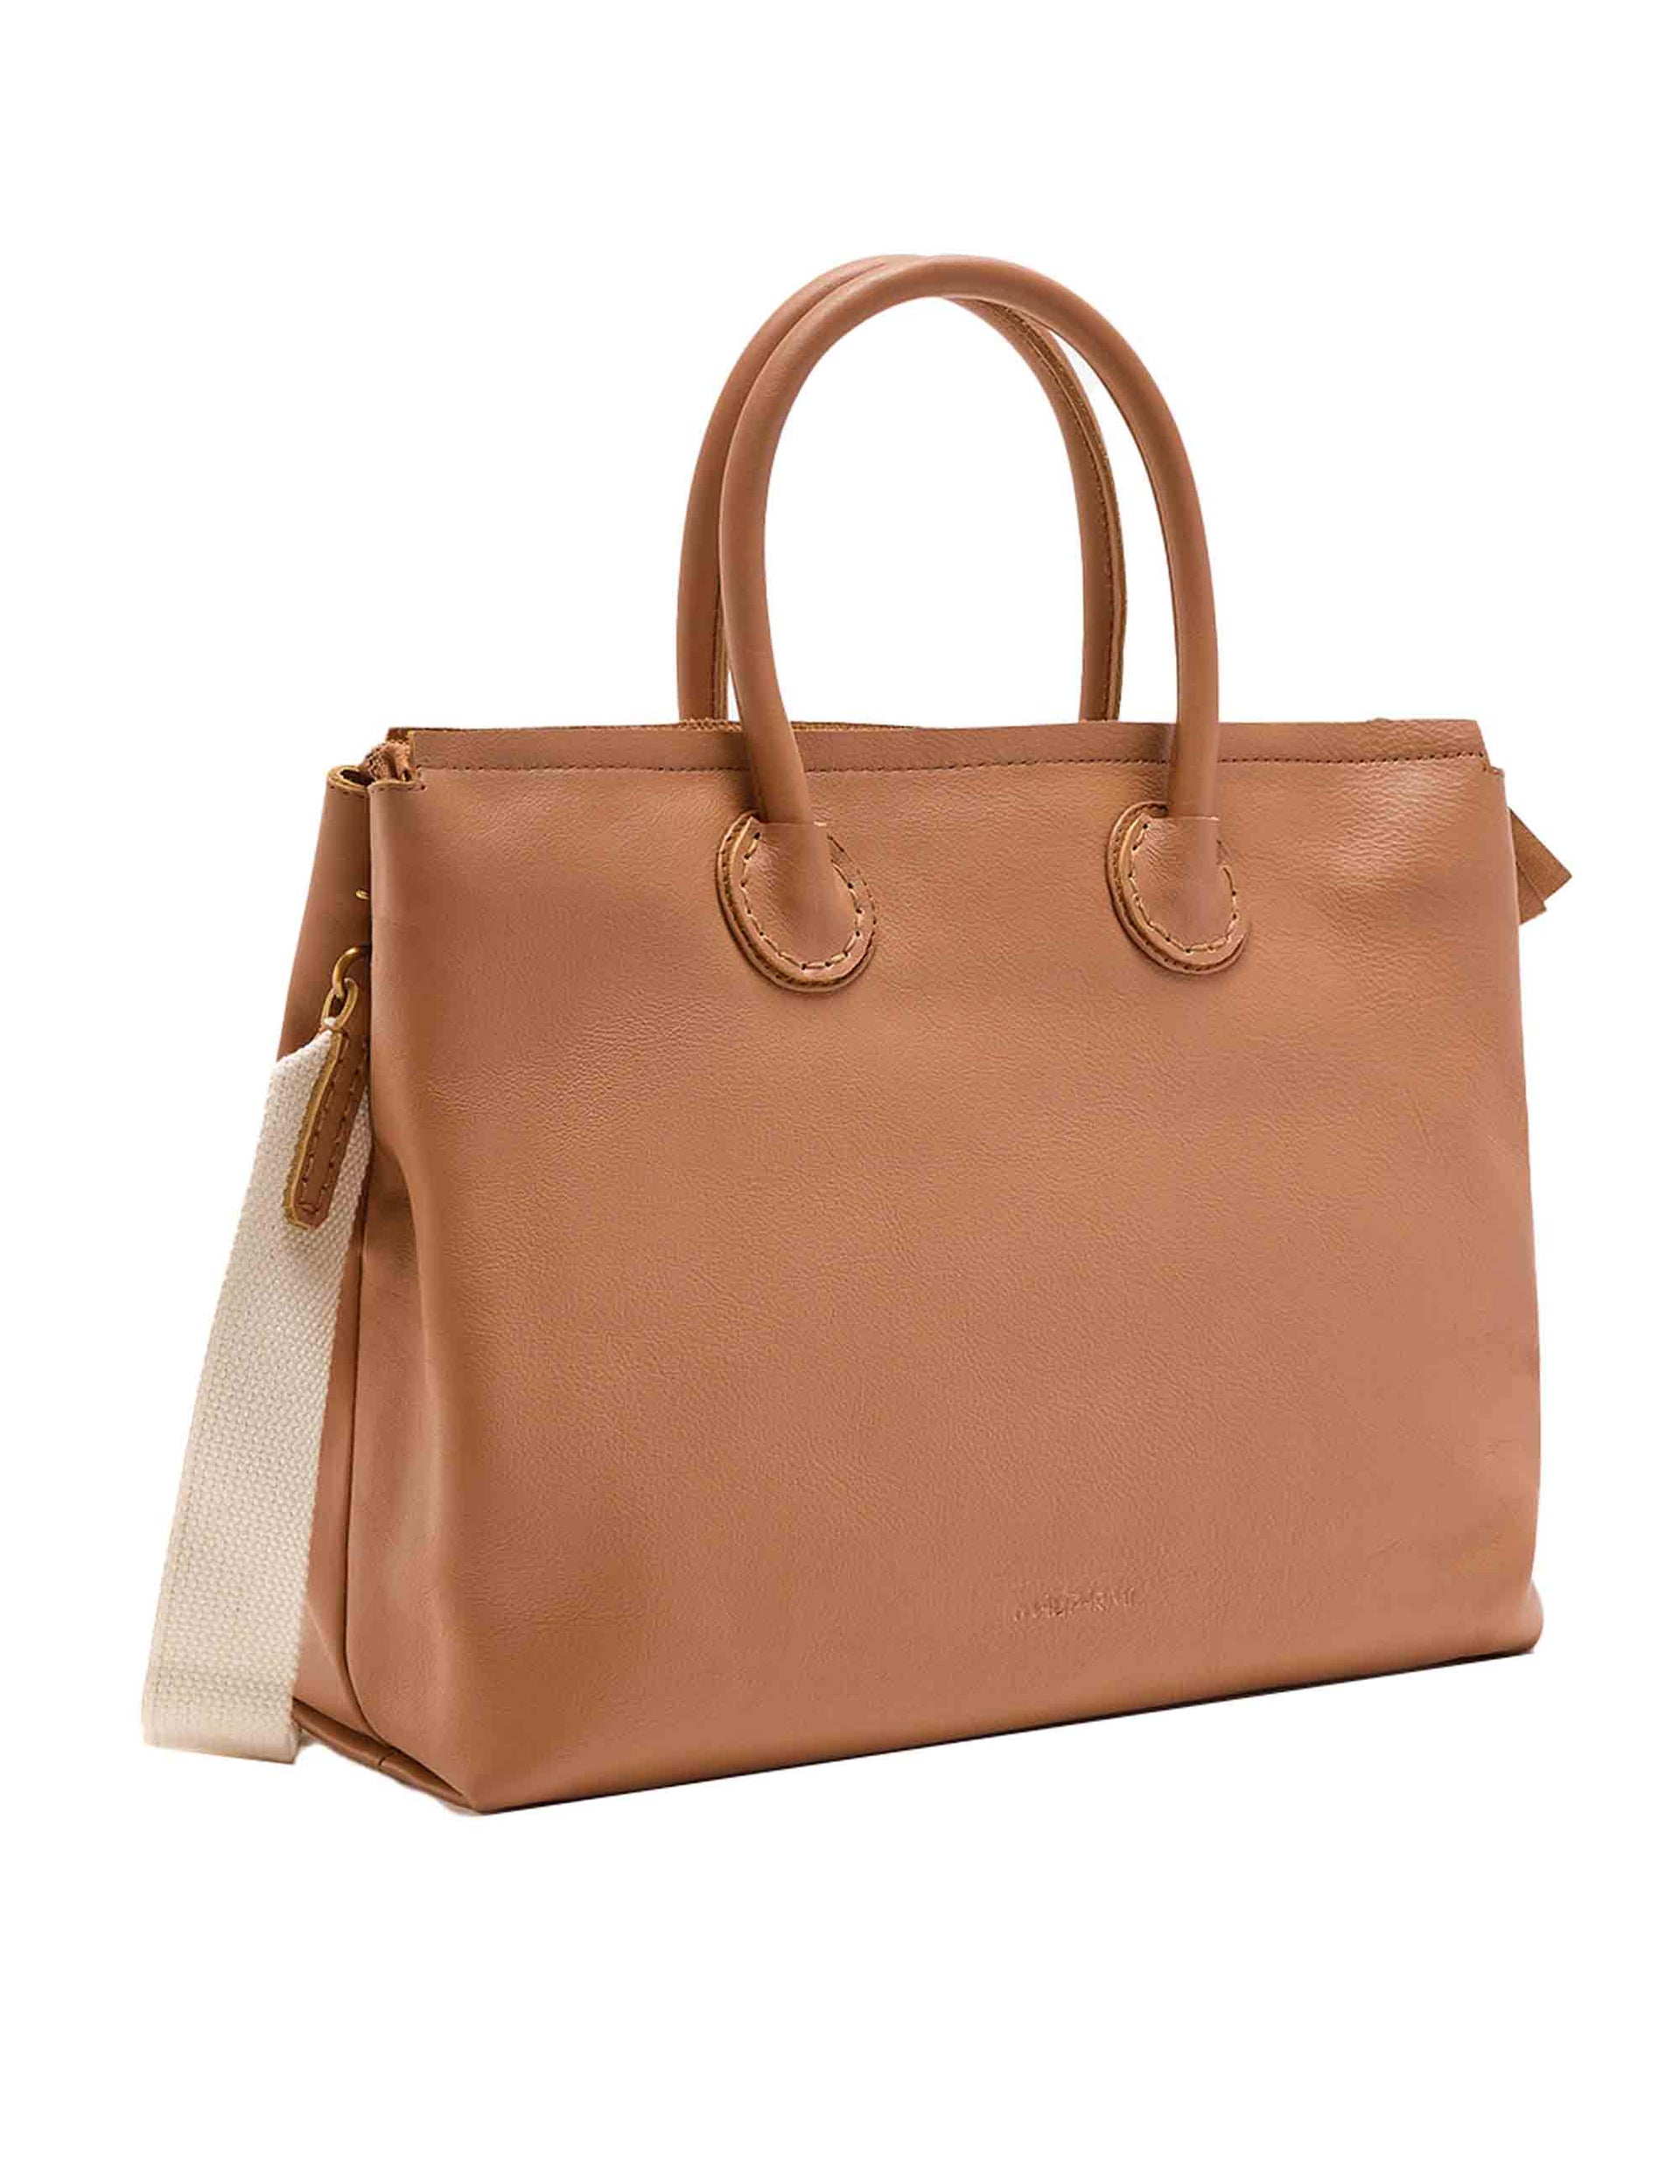 Leather women's shopping bags in tan leather with studs and embroidery